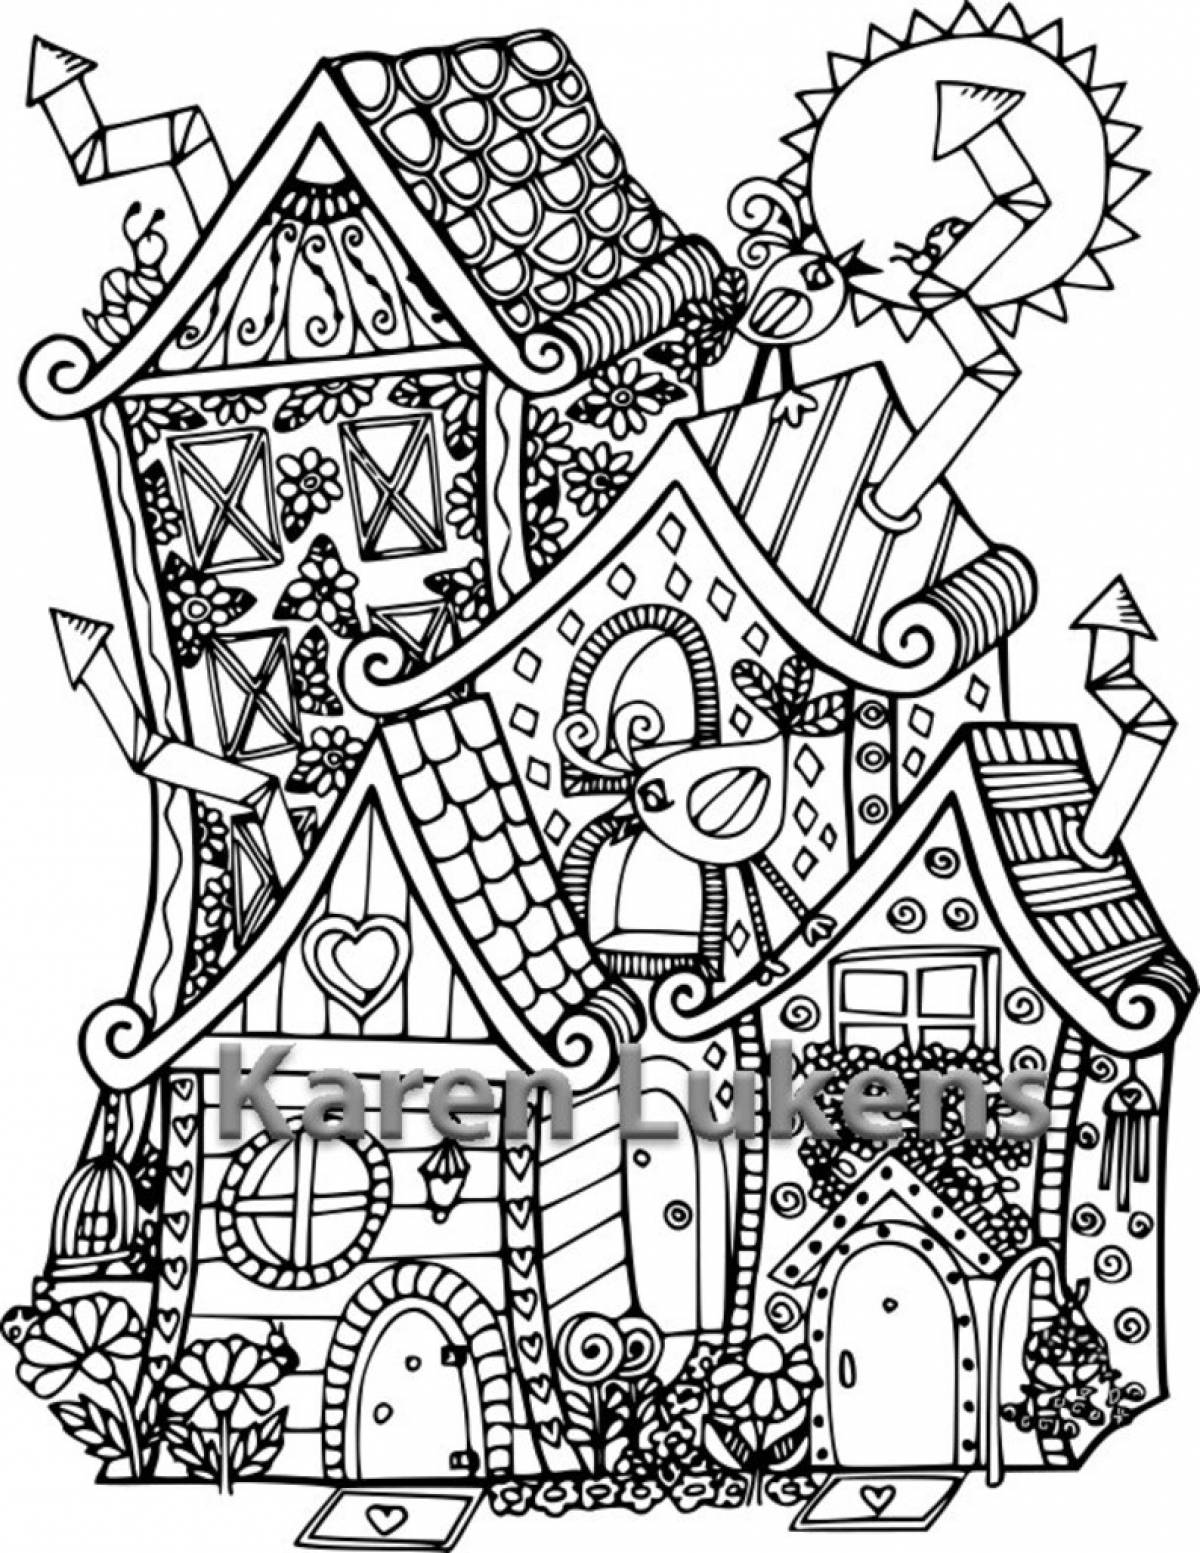 Coloring dreamy anti-stress houses